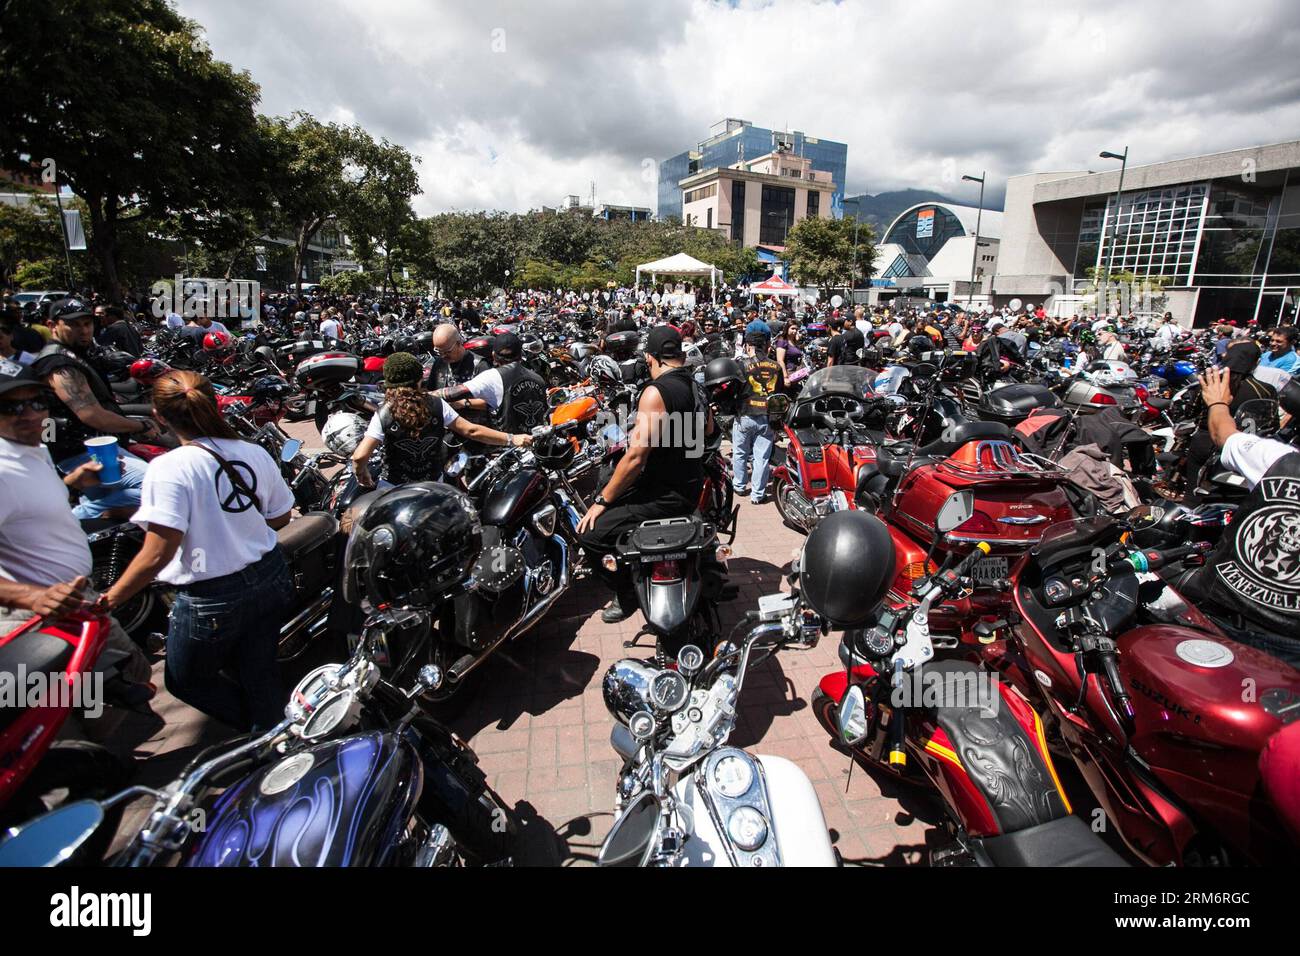 (140126) -- CARACAS, Jan. 26, 2014 (Xinhua) -- Venezuelan bikers participate in the annual mass for the blessing of the bikes 2014, at the Alfredo Sadel de las Mercedes Square, in Caracas, Venezuela, on Jan. 26, 2014. (Xinhua/Boris Vergara) (rt) (ah) VENEZUELA-CARACAS-SOCIETY-EVENT PUBLICATIONxNOTxINxCHN   Caracas Jan 26 2014 XINHUA Venezuelan Bikers participate in The Annual Mass for The Blessing of The Bikes 2014 AT The Alfredo  de Las Mercedes Square in Caracas Venezuela ON Jan 26 2014 XINHUA Boris Vergara RT AH Venezuela Caracas Society Event PUBLICATIONxNOTxINxCHN Stock Photo